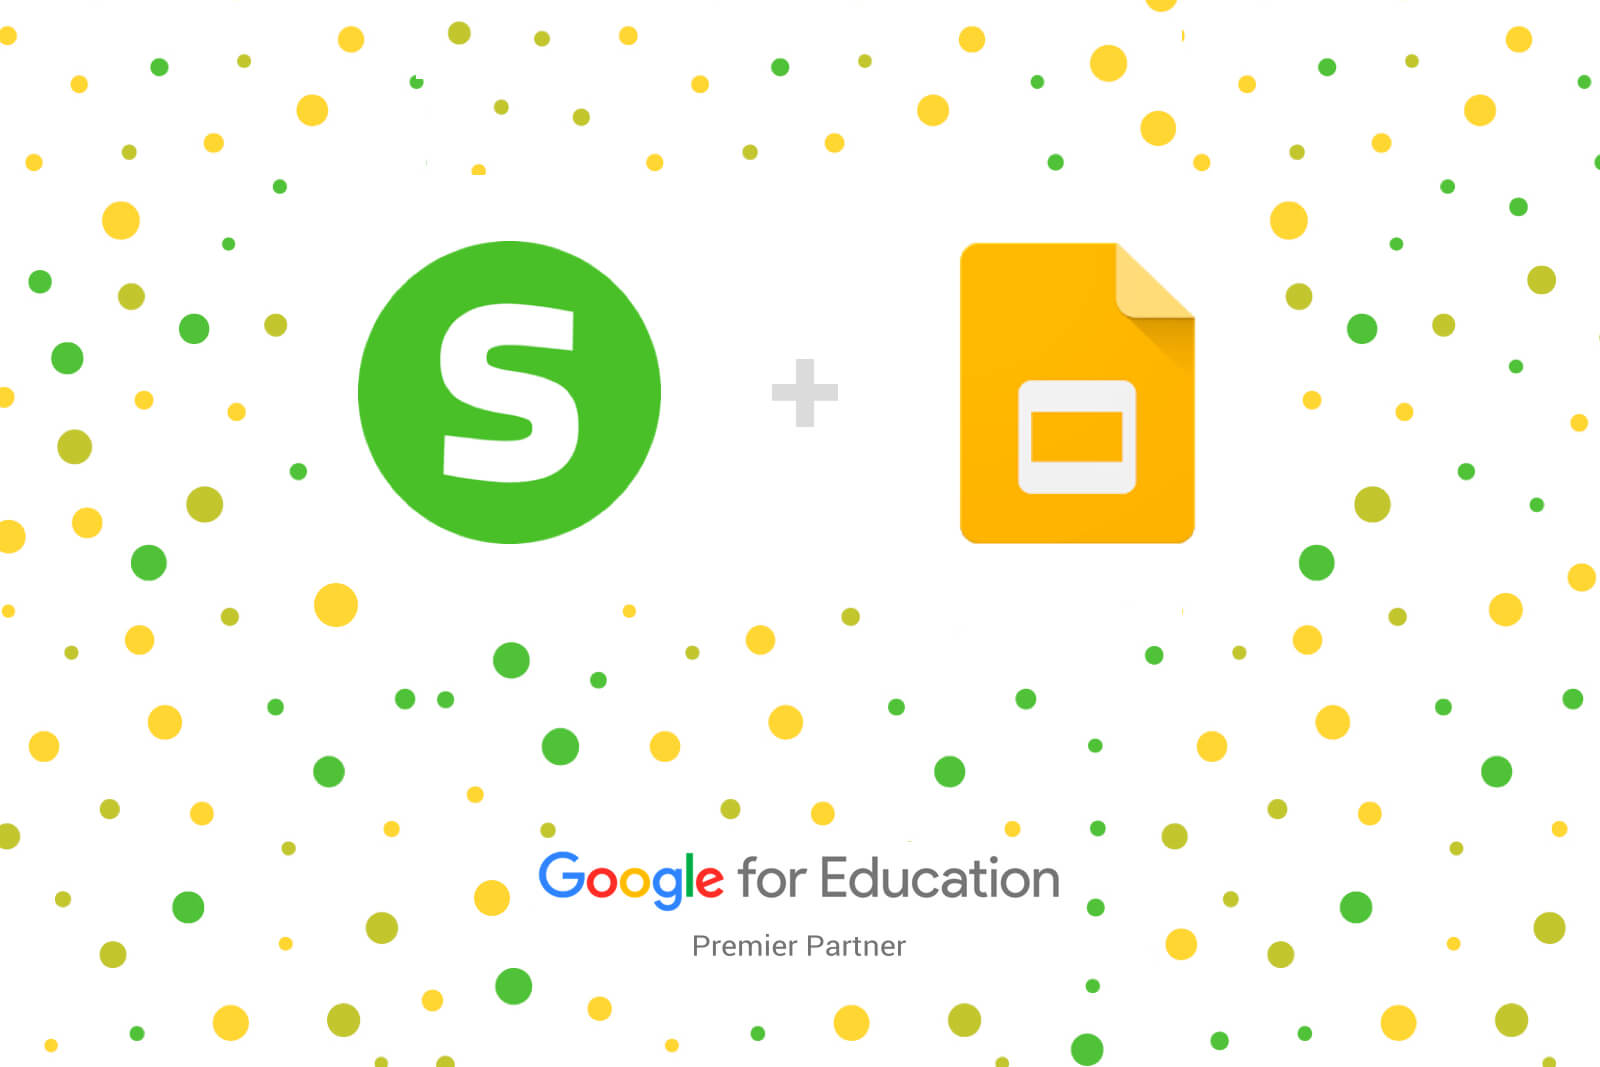 Slido logo and Google Slides logo on a white background with colored dots.